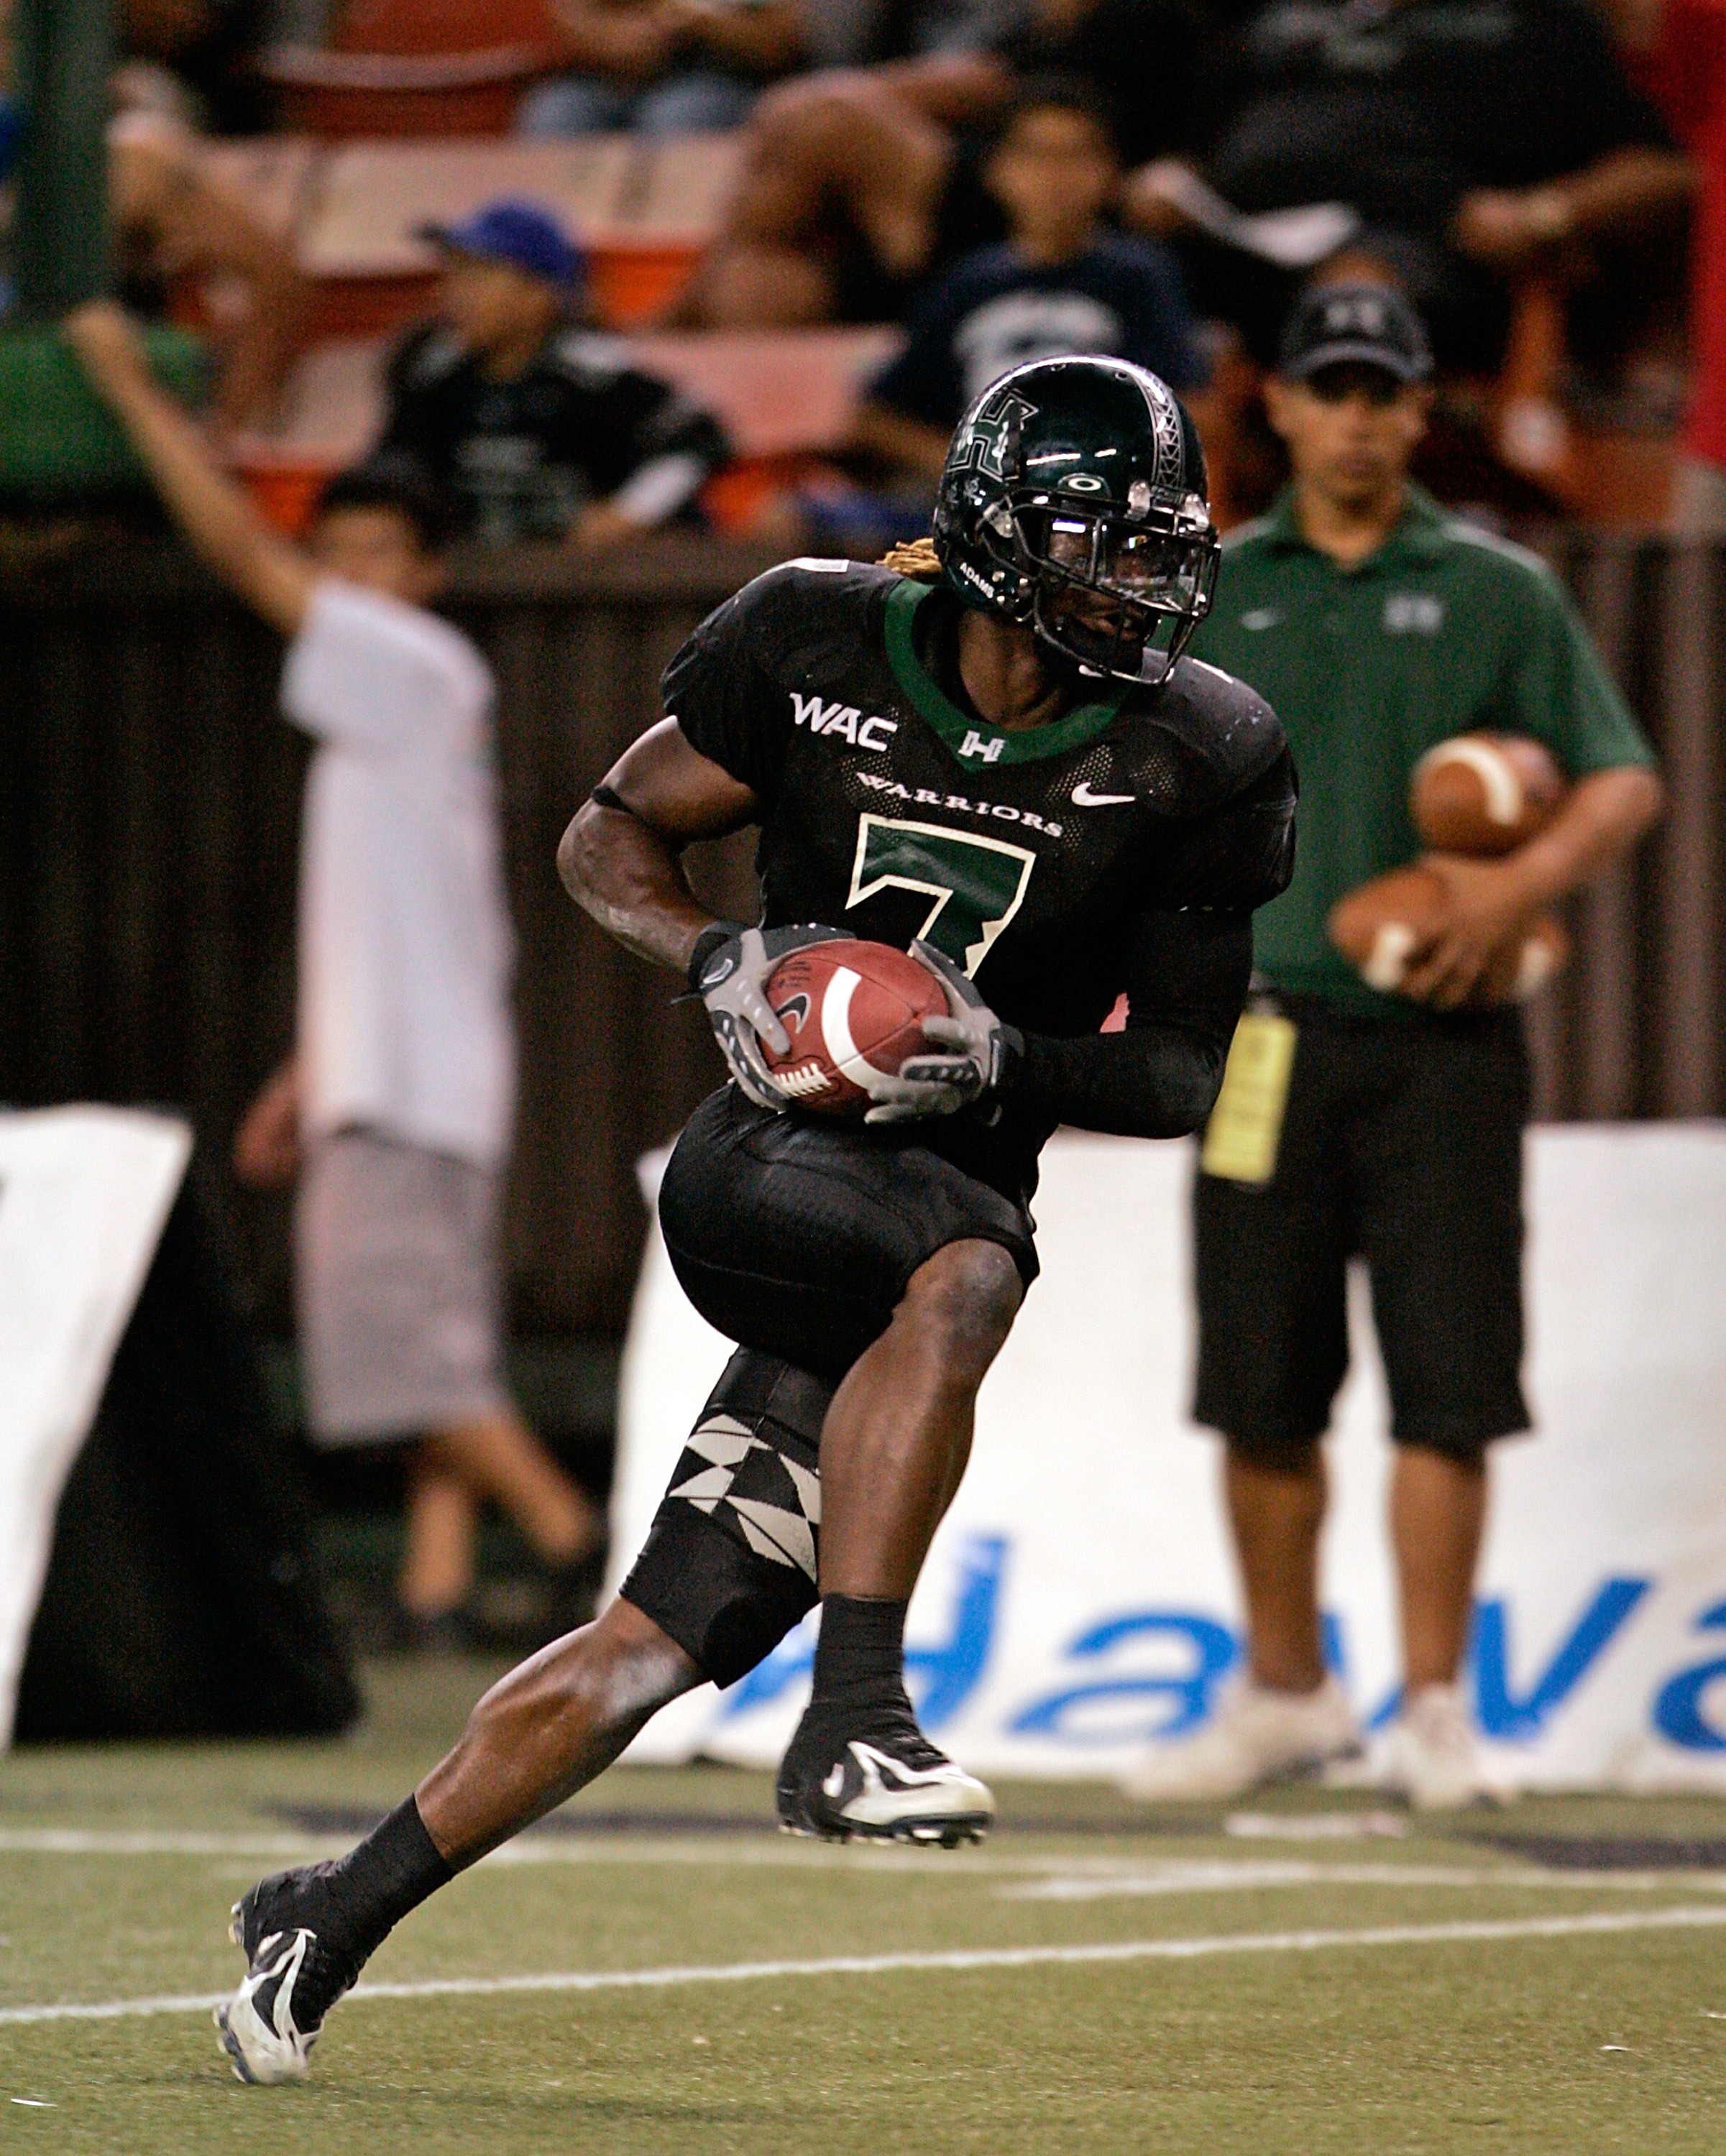 HONOLULU-SEPTEMBER 22:  University of Hawaii Warriors WR #7 Davone Bess runs in a touchdown during their game against the Charleston Southern Buccaneers  at Aloha Stadium, September 22, 2007 in Honolulu, Hawaii.  (Photo by Marco Garcia/Getty Images)